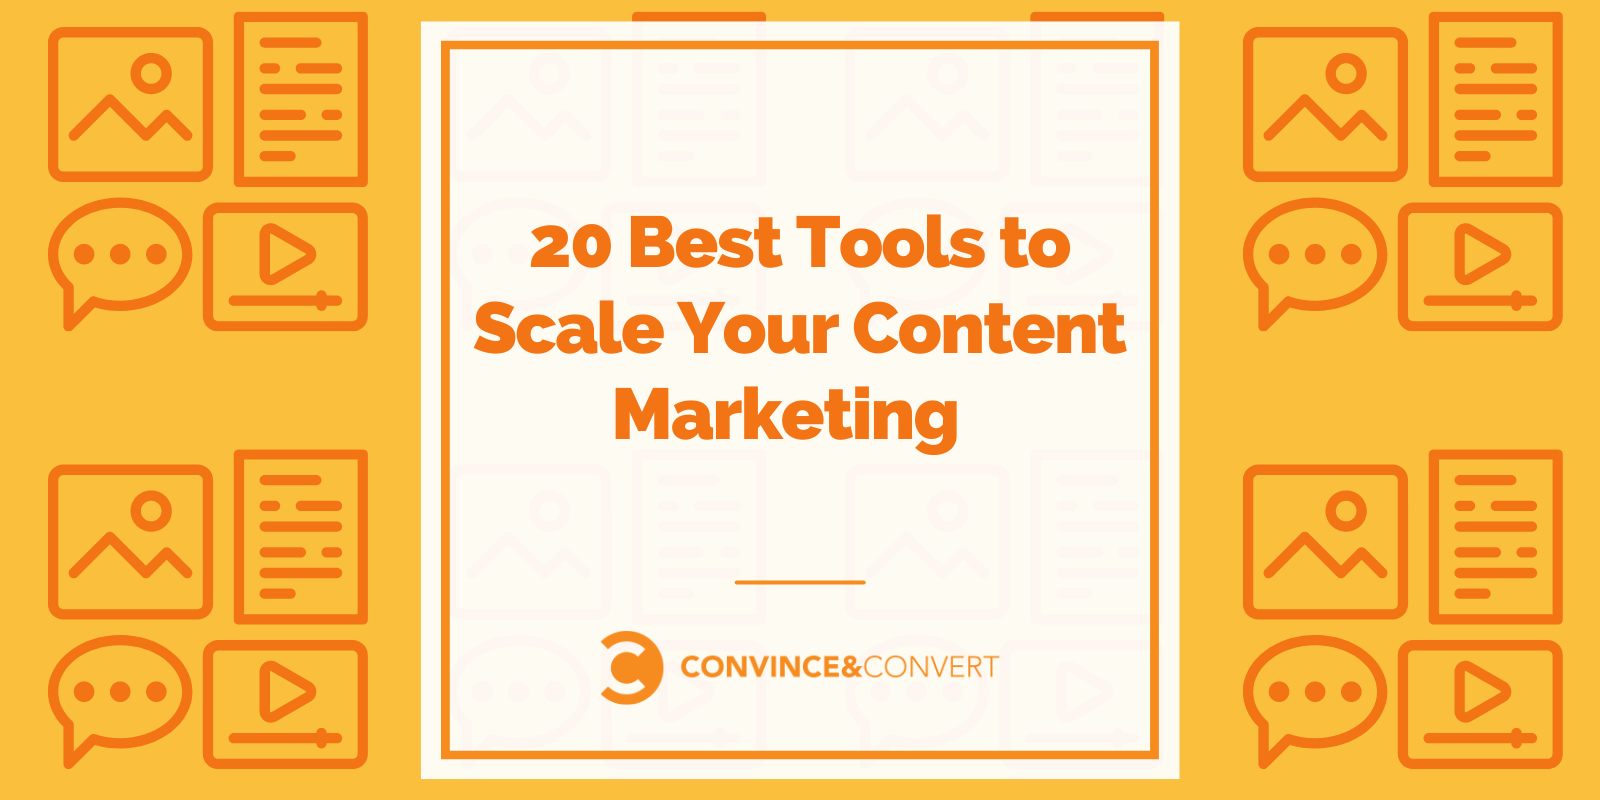 You are currently viewing 20 Best Tools to Scale Your Content Marketing